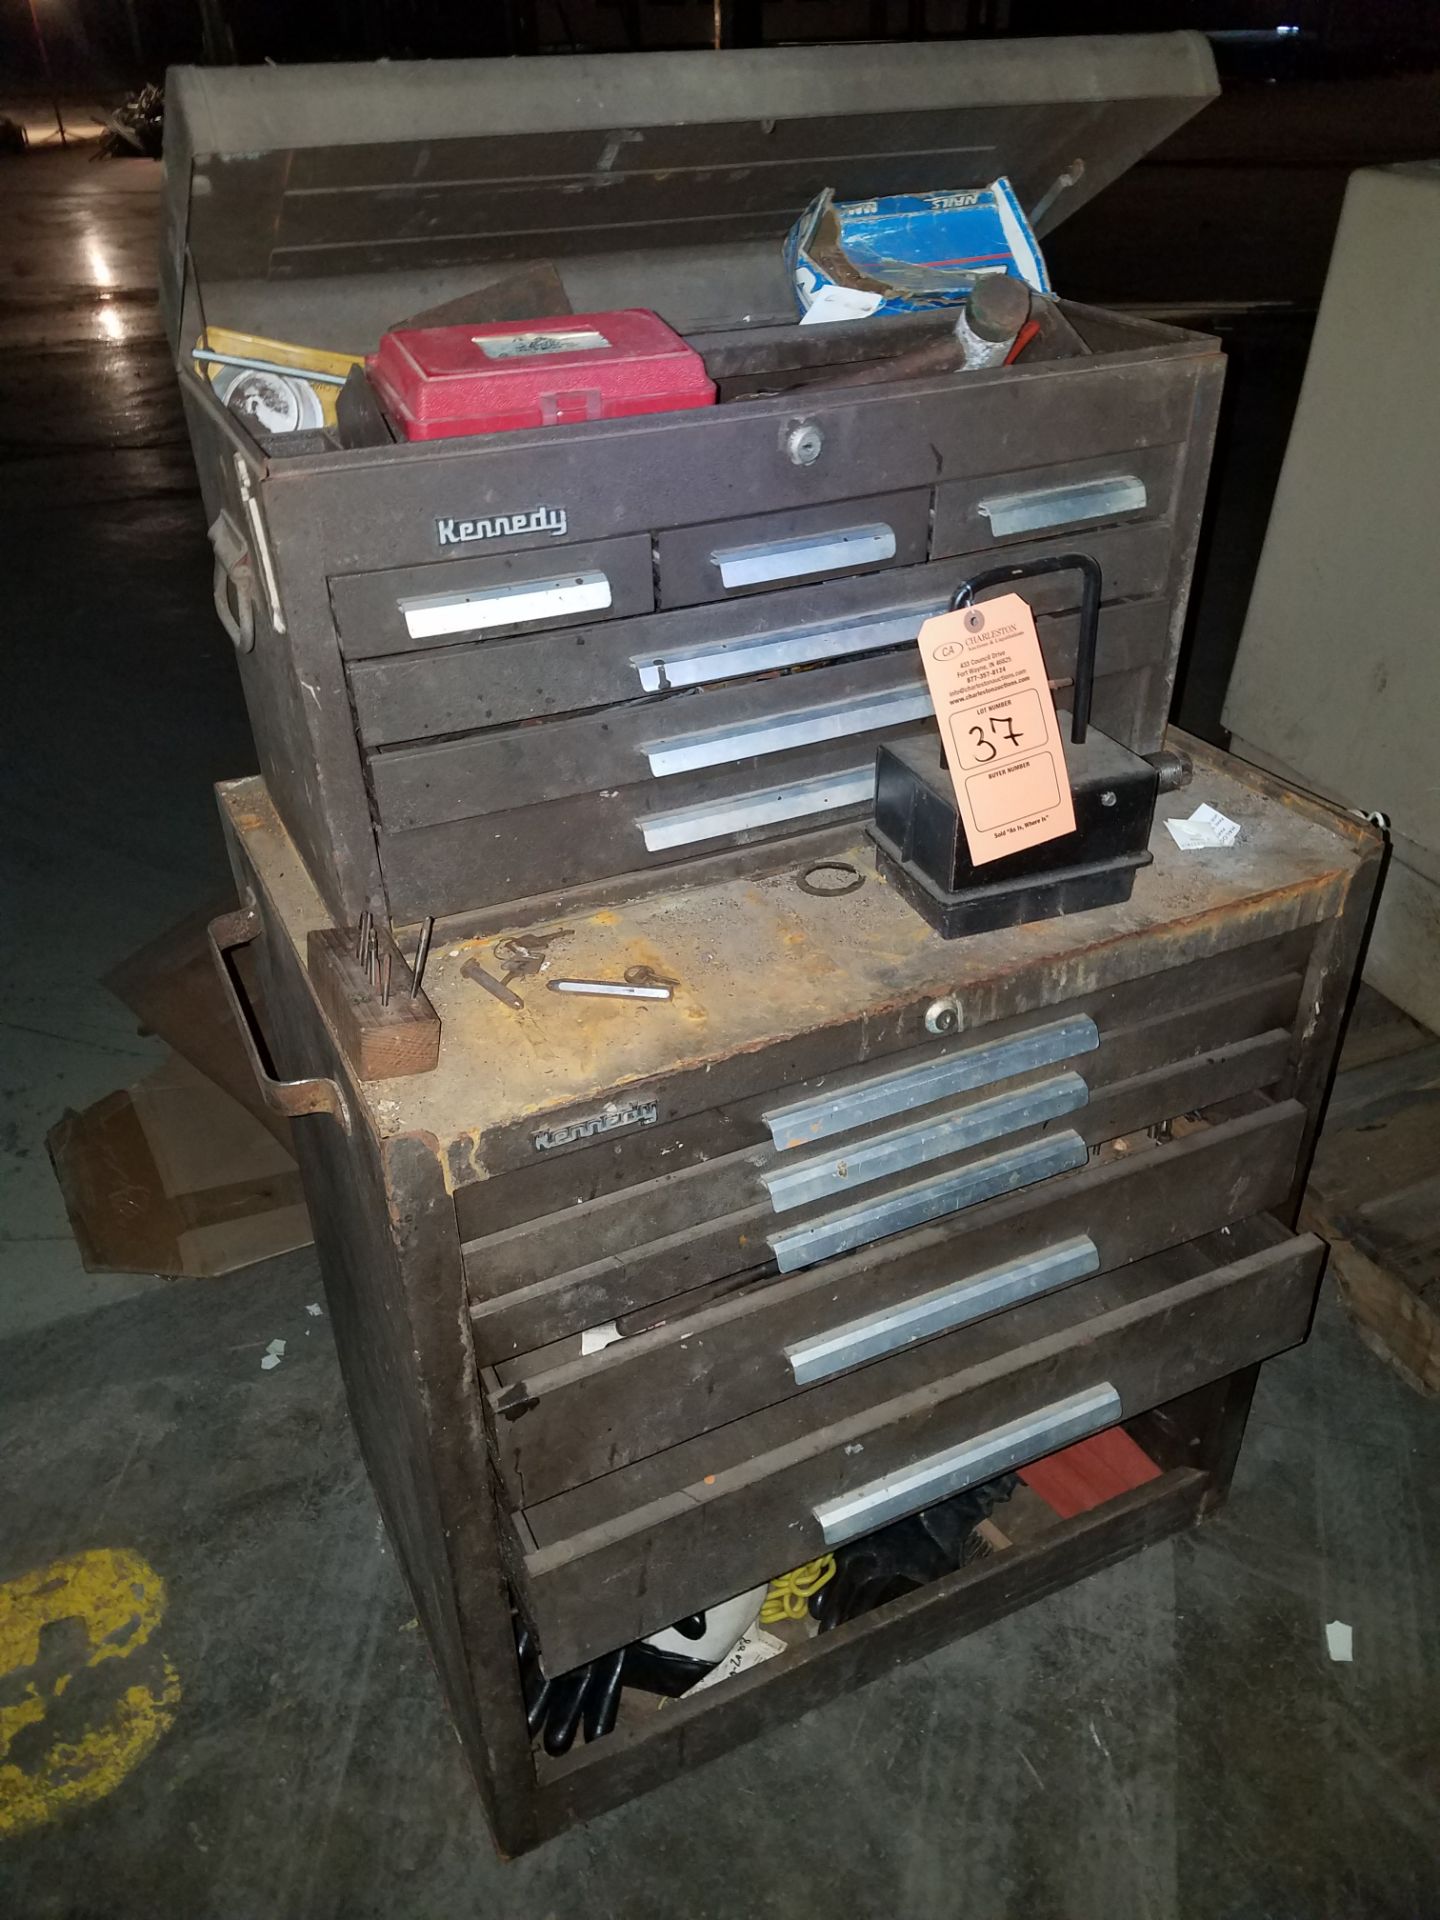 KENNEDY TOOL BOX & CONTENTS (LOCATED AT: 709 WEST WALL STREET, MORRISON IL 61270)